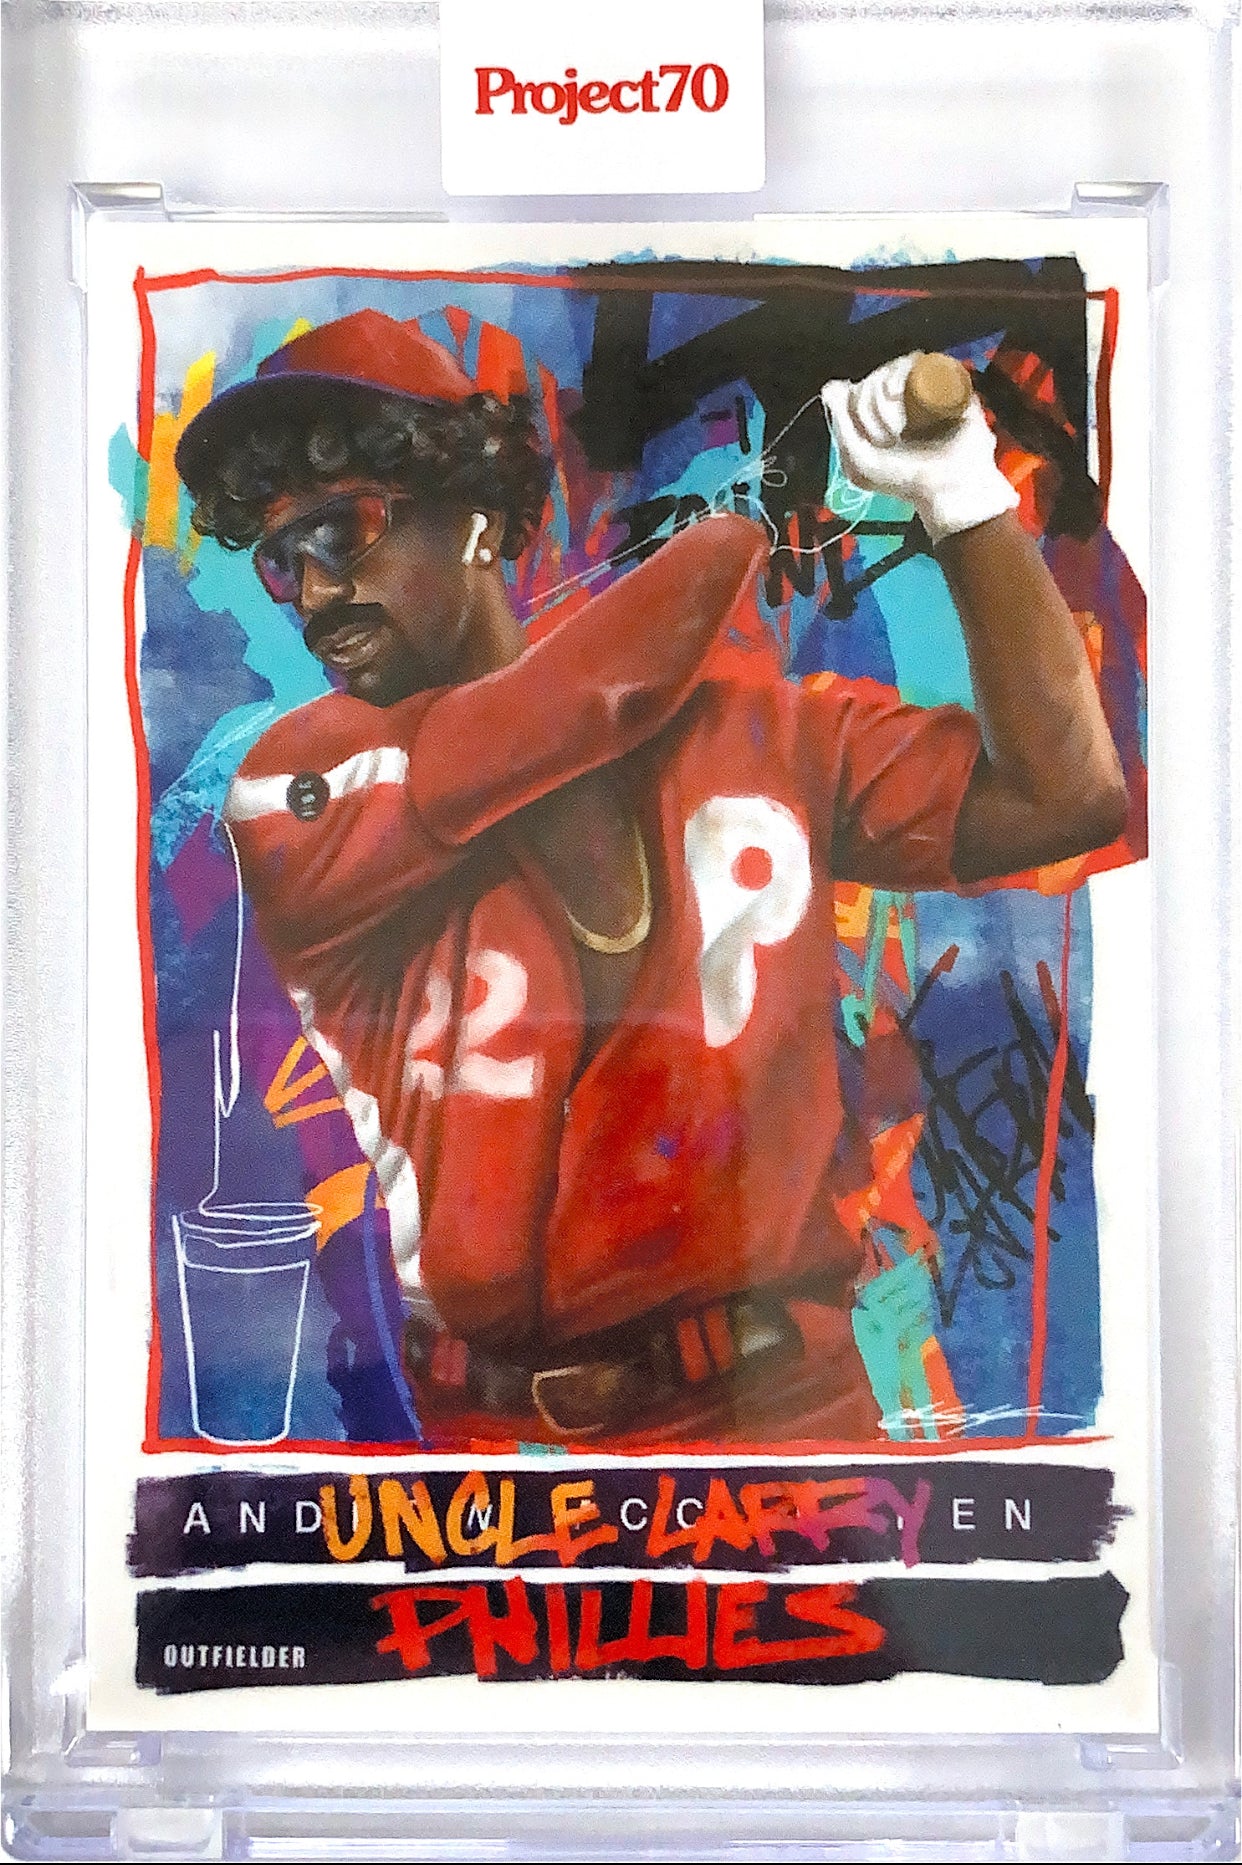 Topps Project 70 - 1976 Andrew McCutchen by Chuck Styles